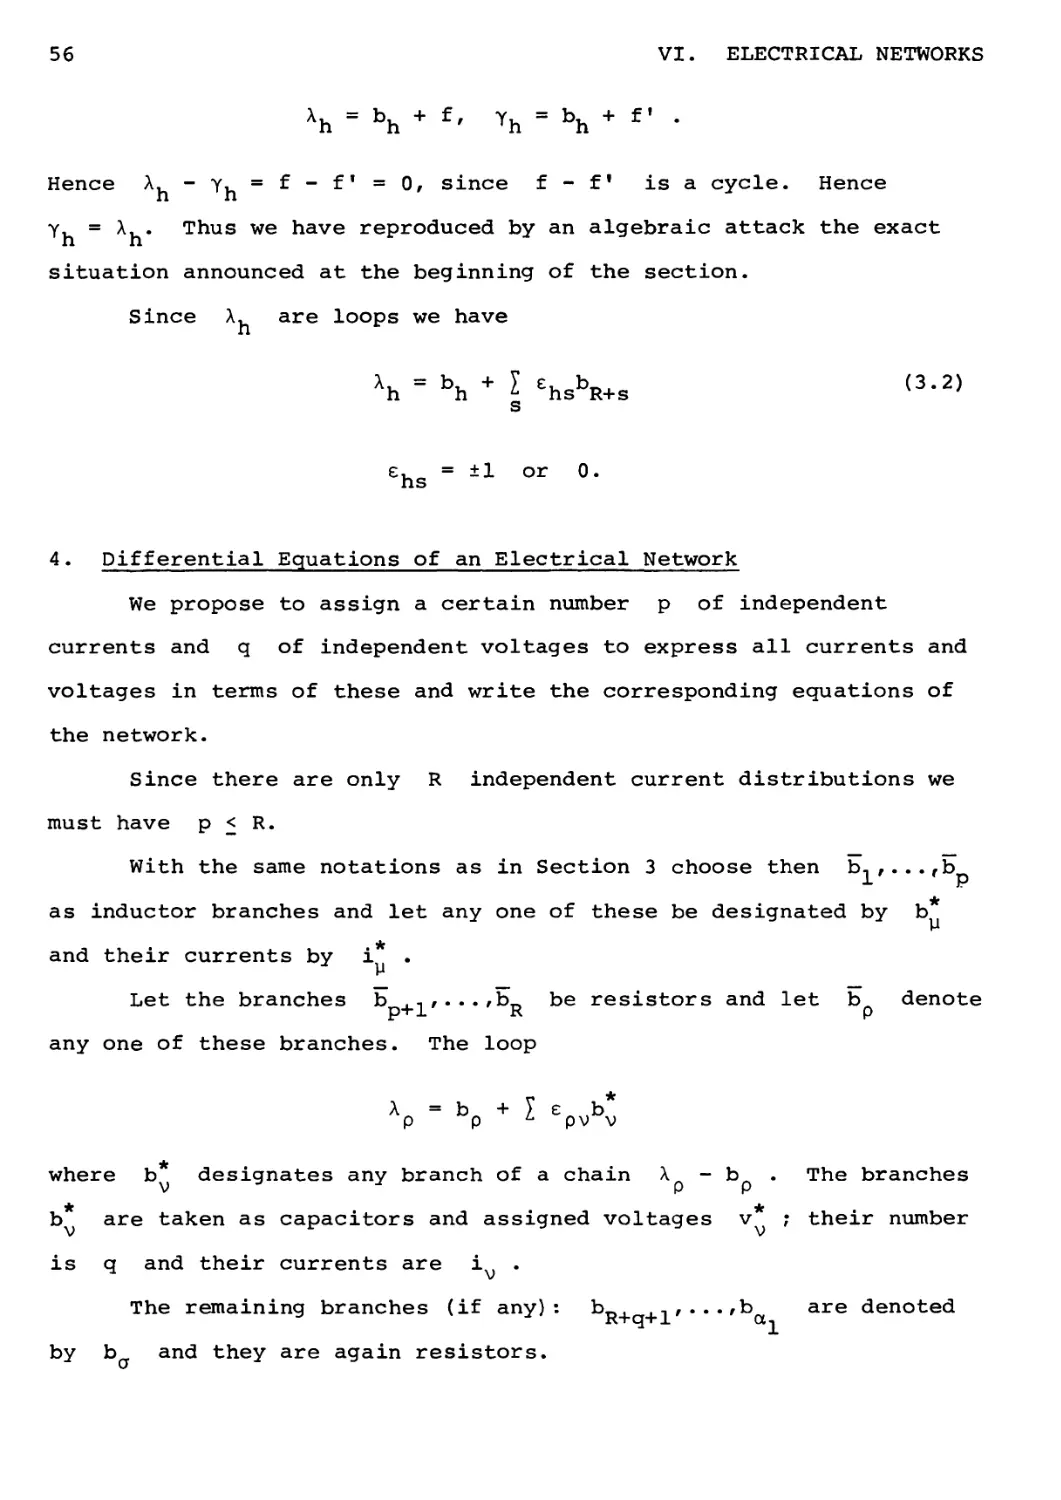 4. Differential Equations of an Electrical Network